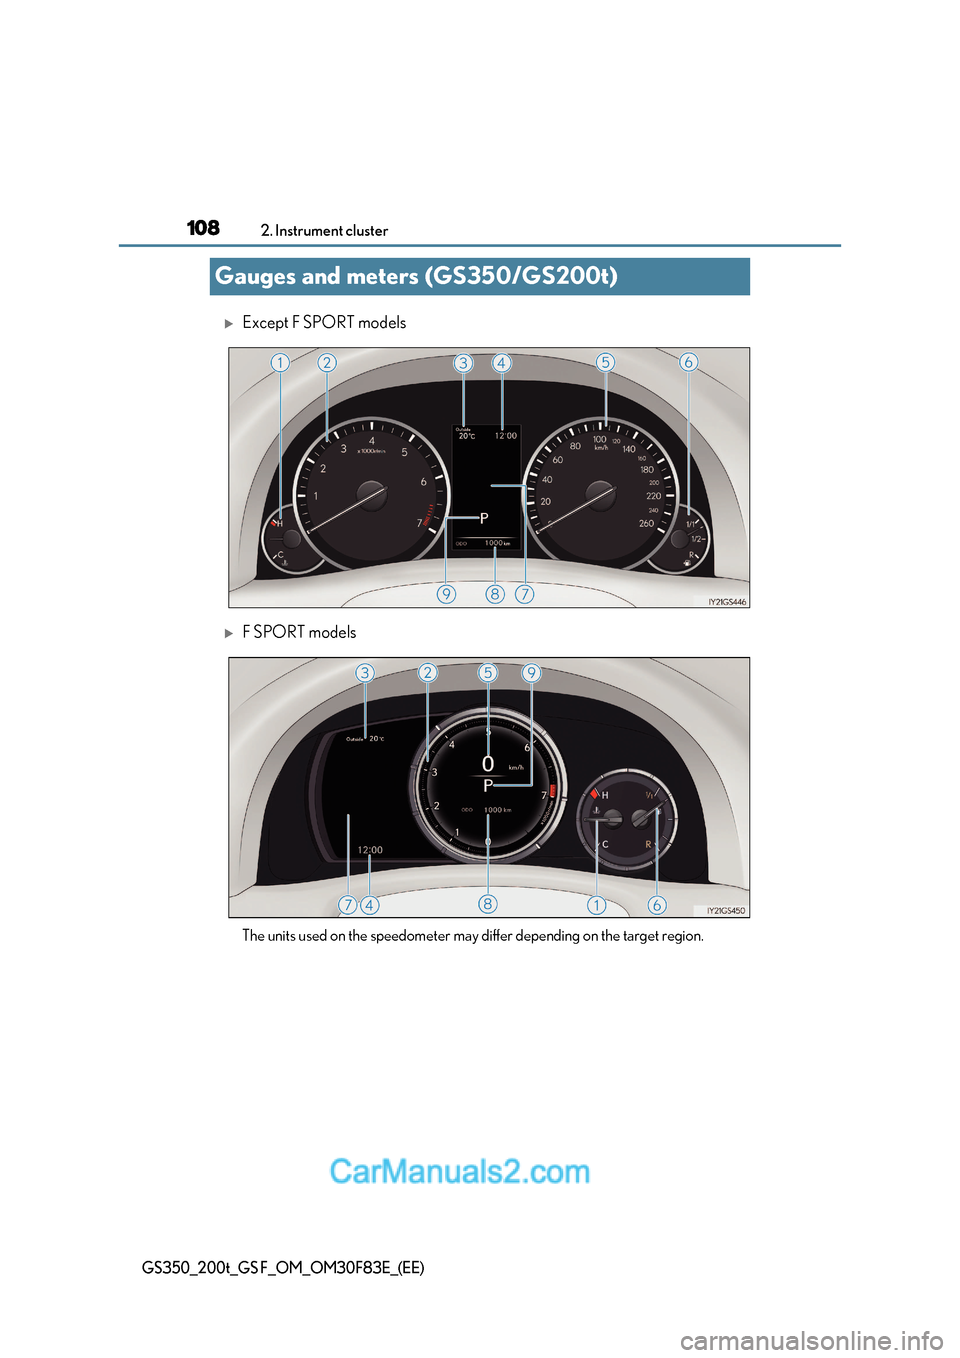 Lexus GS F 2017  Owners Manual 1082. Instrument cluster
GS350_200t_GS F_OM_OM30F83E_(EE)
Gauges and meters (GS350/GS200t)
Except F SPORT models
F SPORT models 
The units used on the speedometer may differ depending on the tar